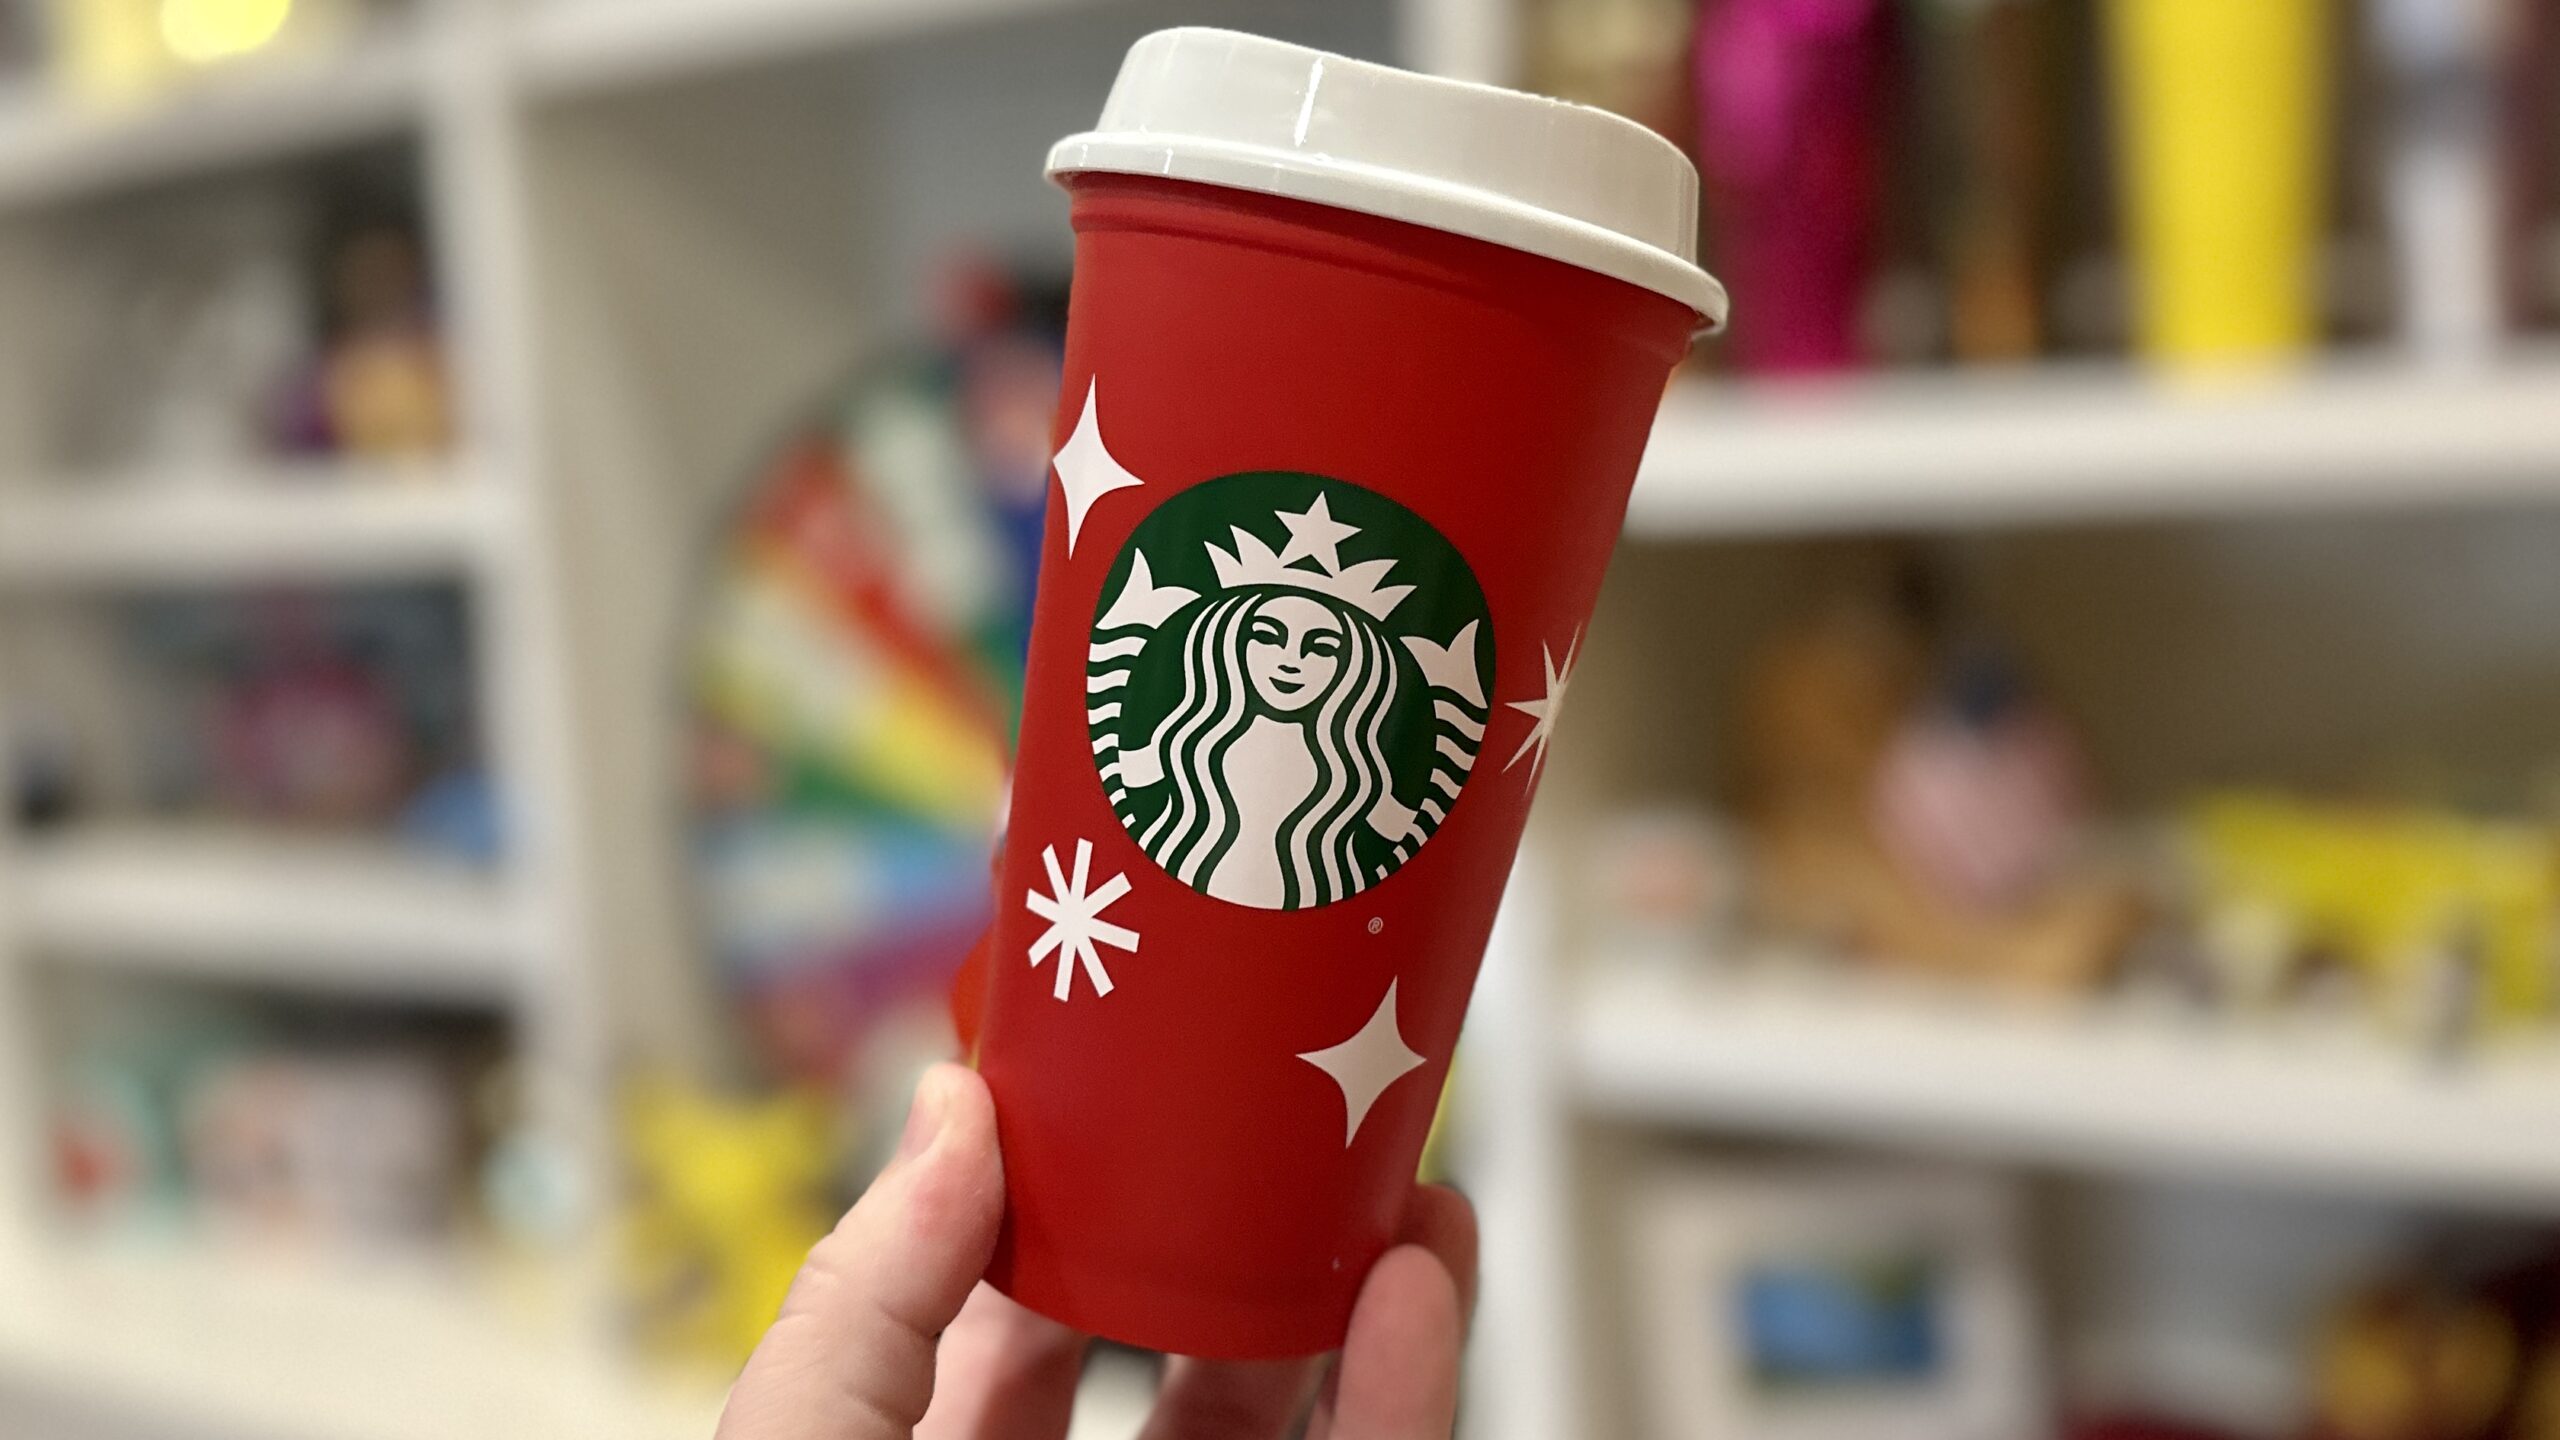 https://thefreebieguy.com/wp-content/uploads/2022/11/2022-starbucks-red-holiday-cup-scaled.jpg